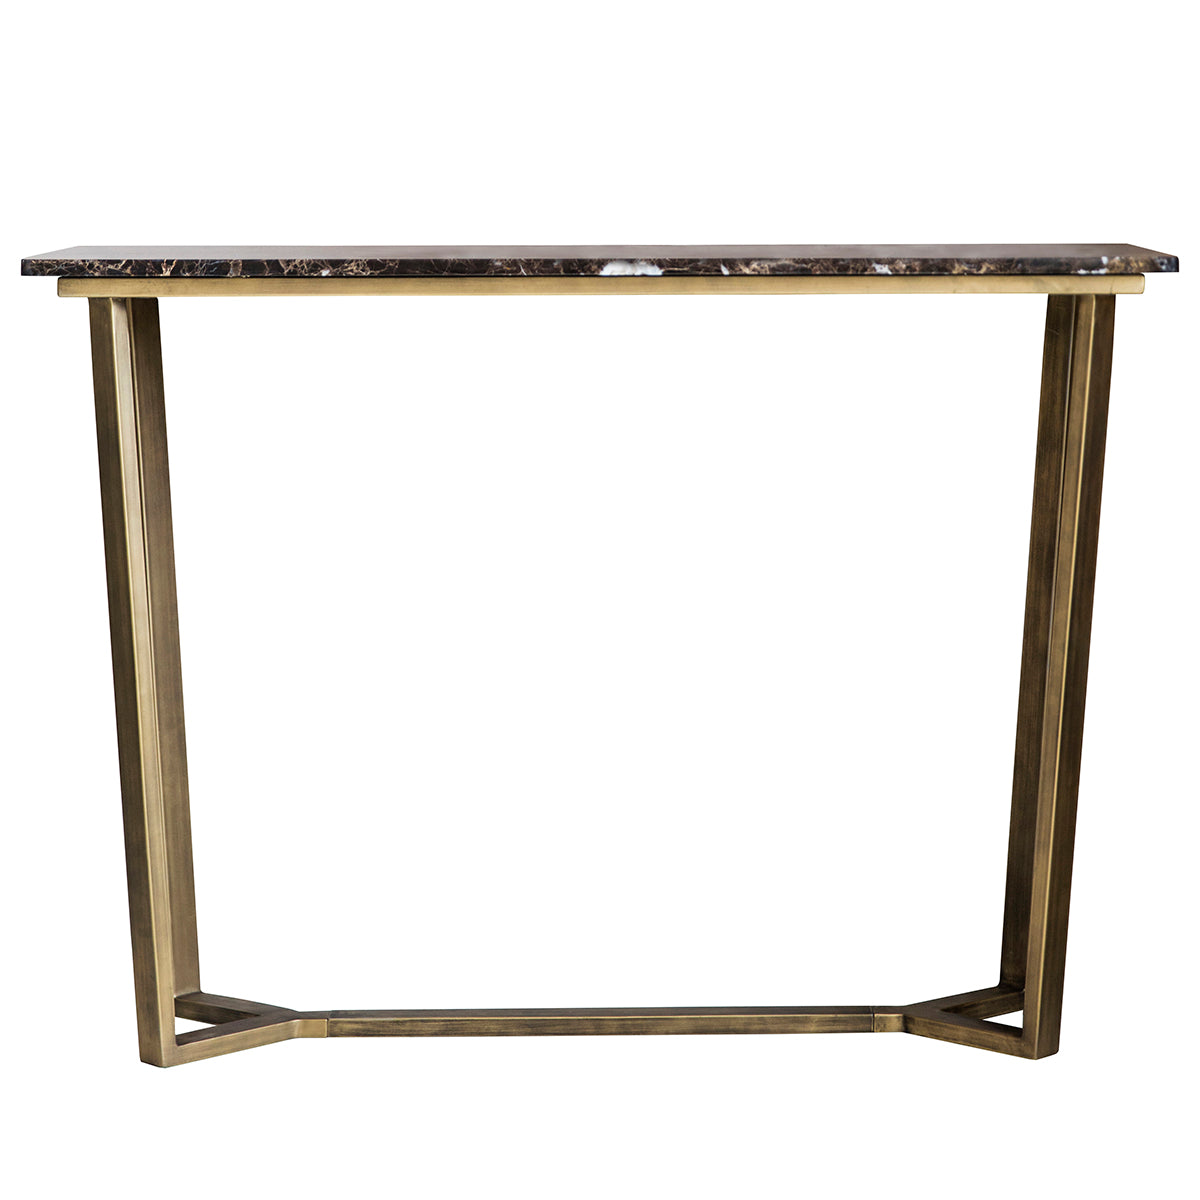 A Moreleigh Console Table Marble 1100x400x800mm from Kikiathome.co.uk with a gold frame and marble top, perfect for elegant interior decor.